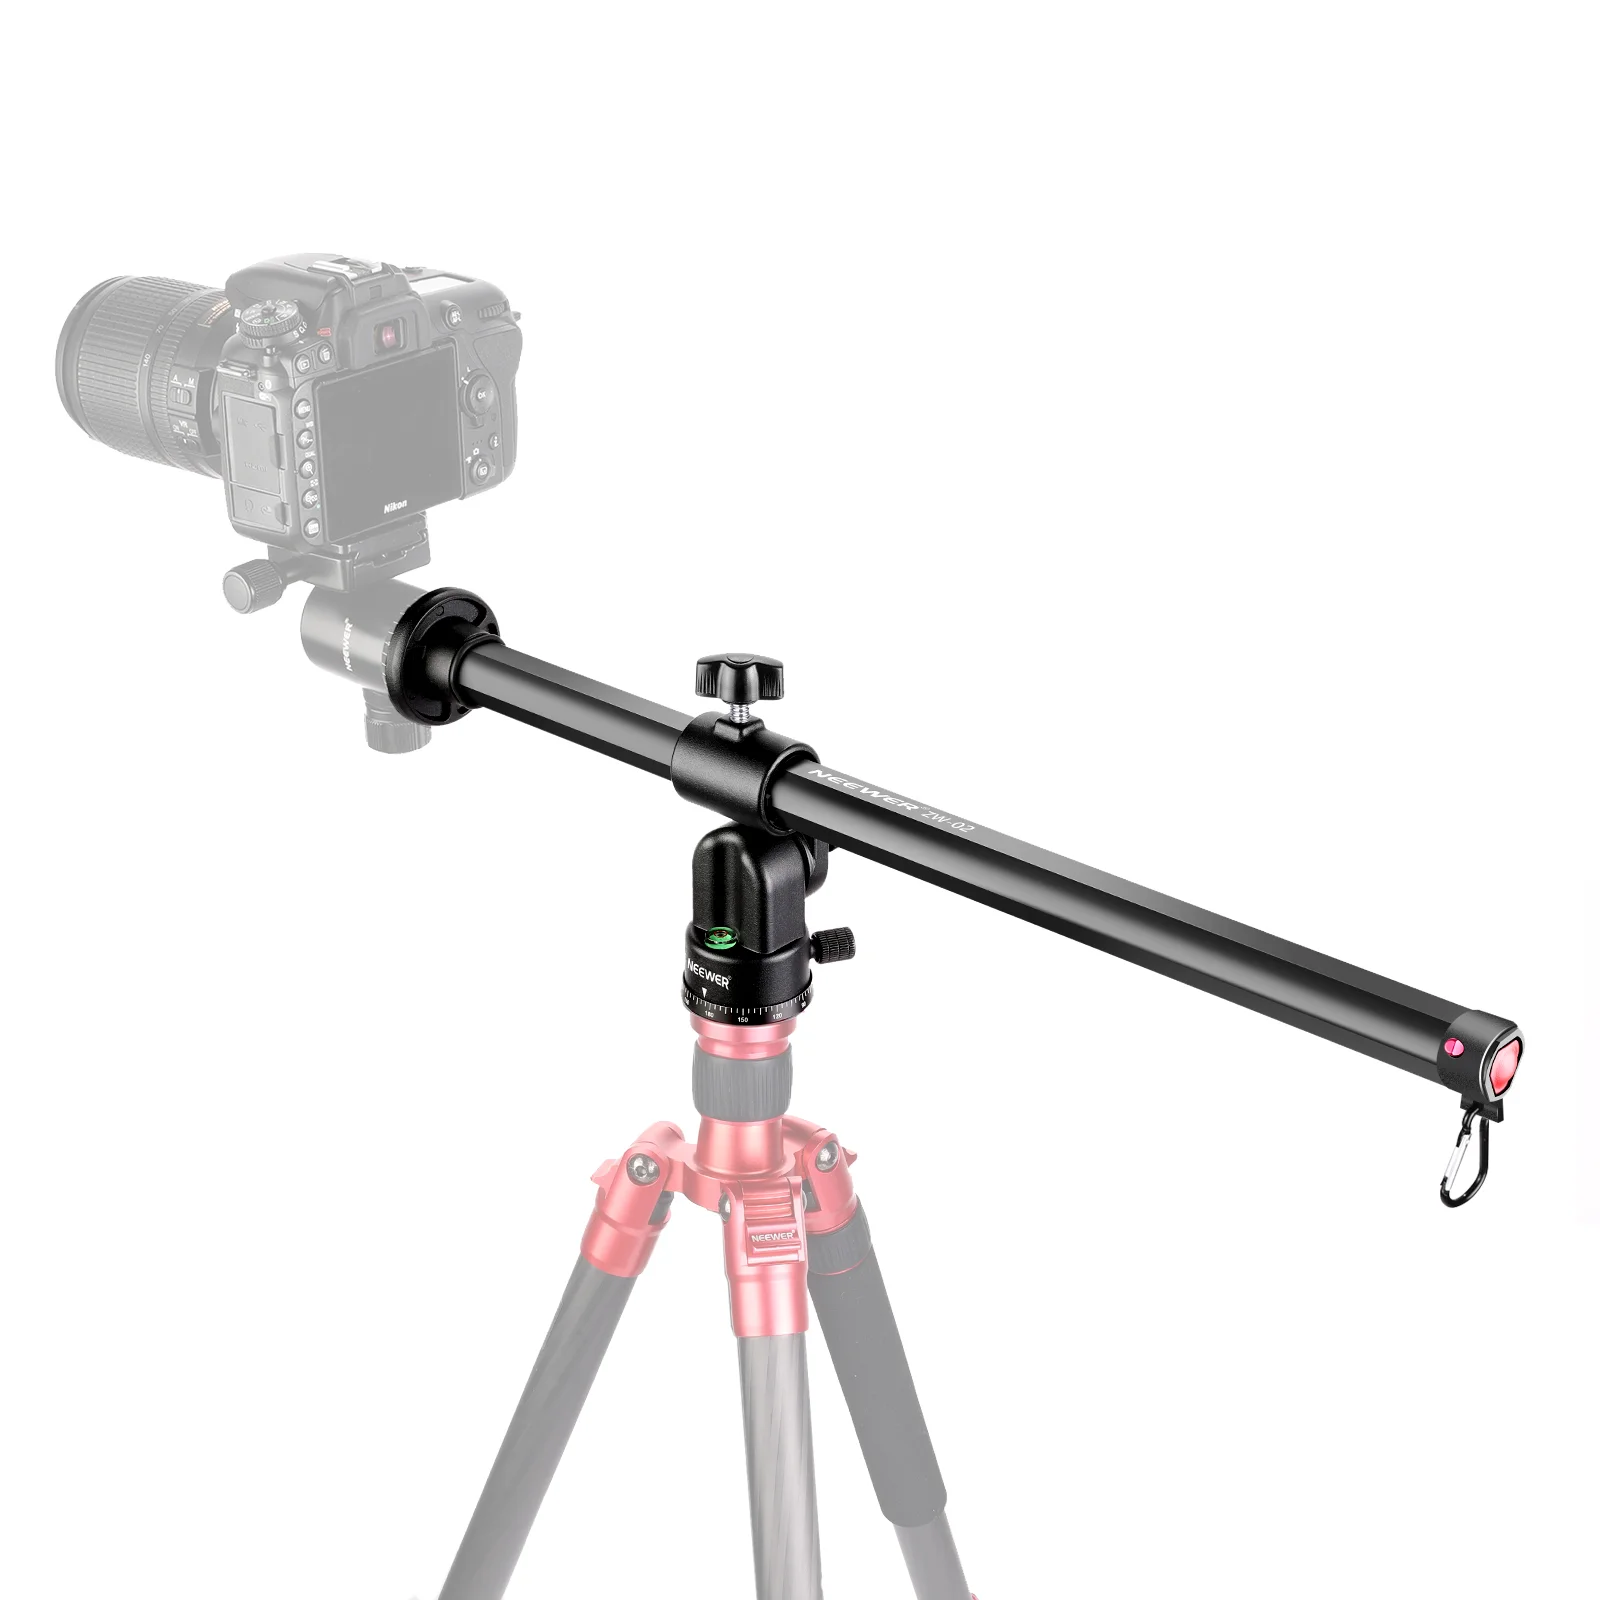 25mm Tube FOTOBETTER Camera Tripod Boom Arm,Rotatable Multi-Angle Tripod Center Column Tripod Extension Arm Extender with Locking System for Macro Over Head Studio Outdoor Shooting,Max Load 5kg 